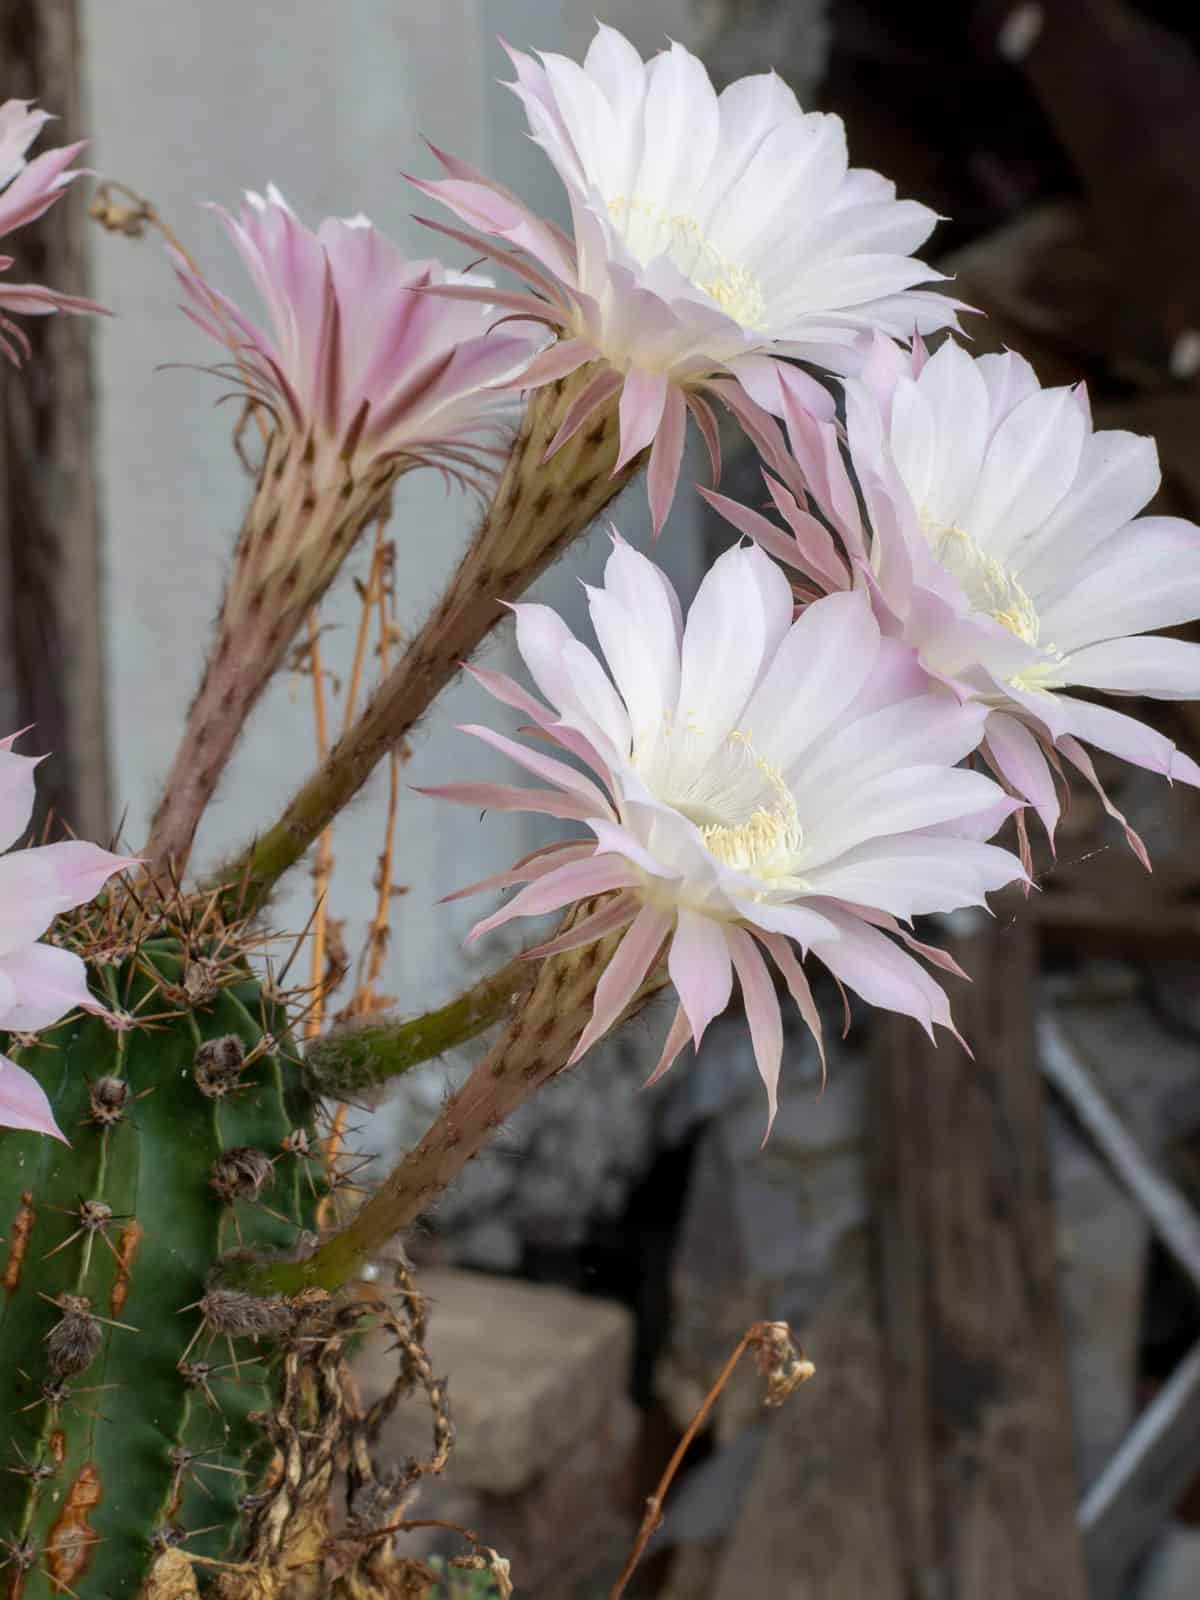 Stunning bright pink and white gradient flower of a Hedgehog Cactus